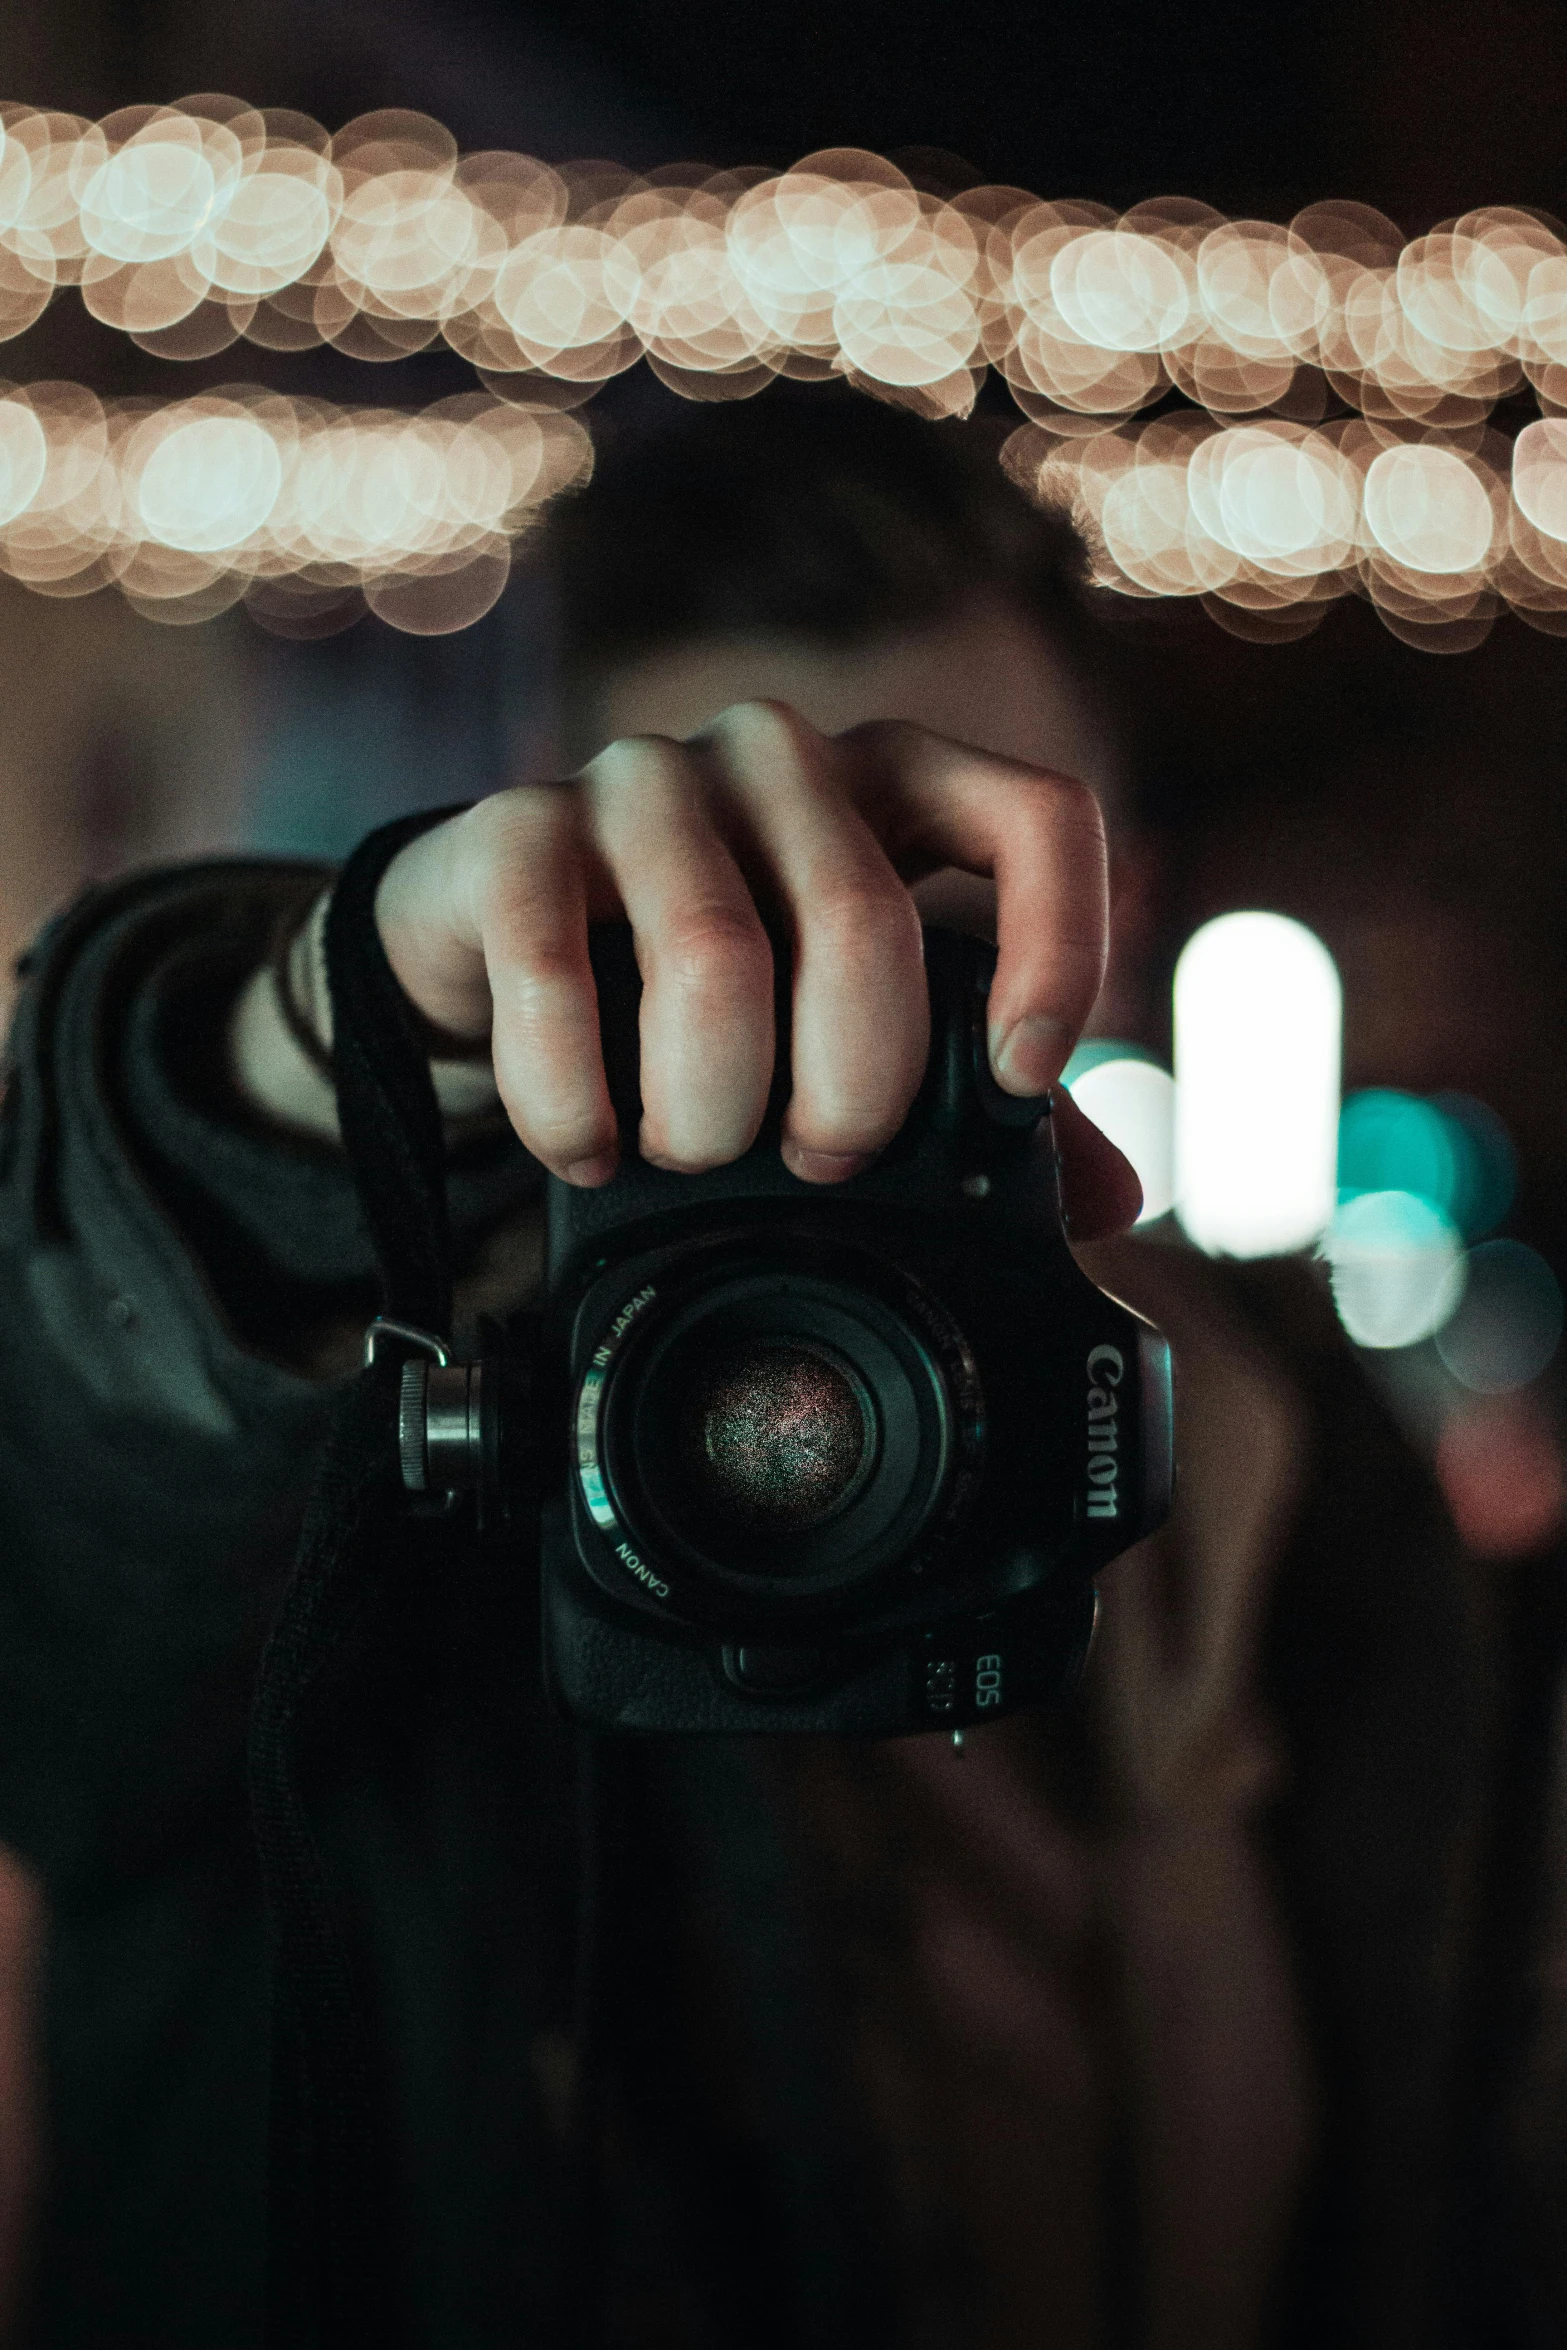 a person taking a picture with a camera, flashing lights, holding it out to the camera, sharply focused, 2019 trending photo